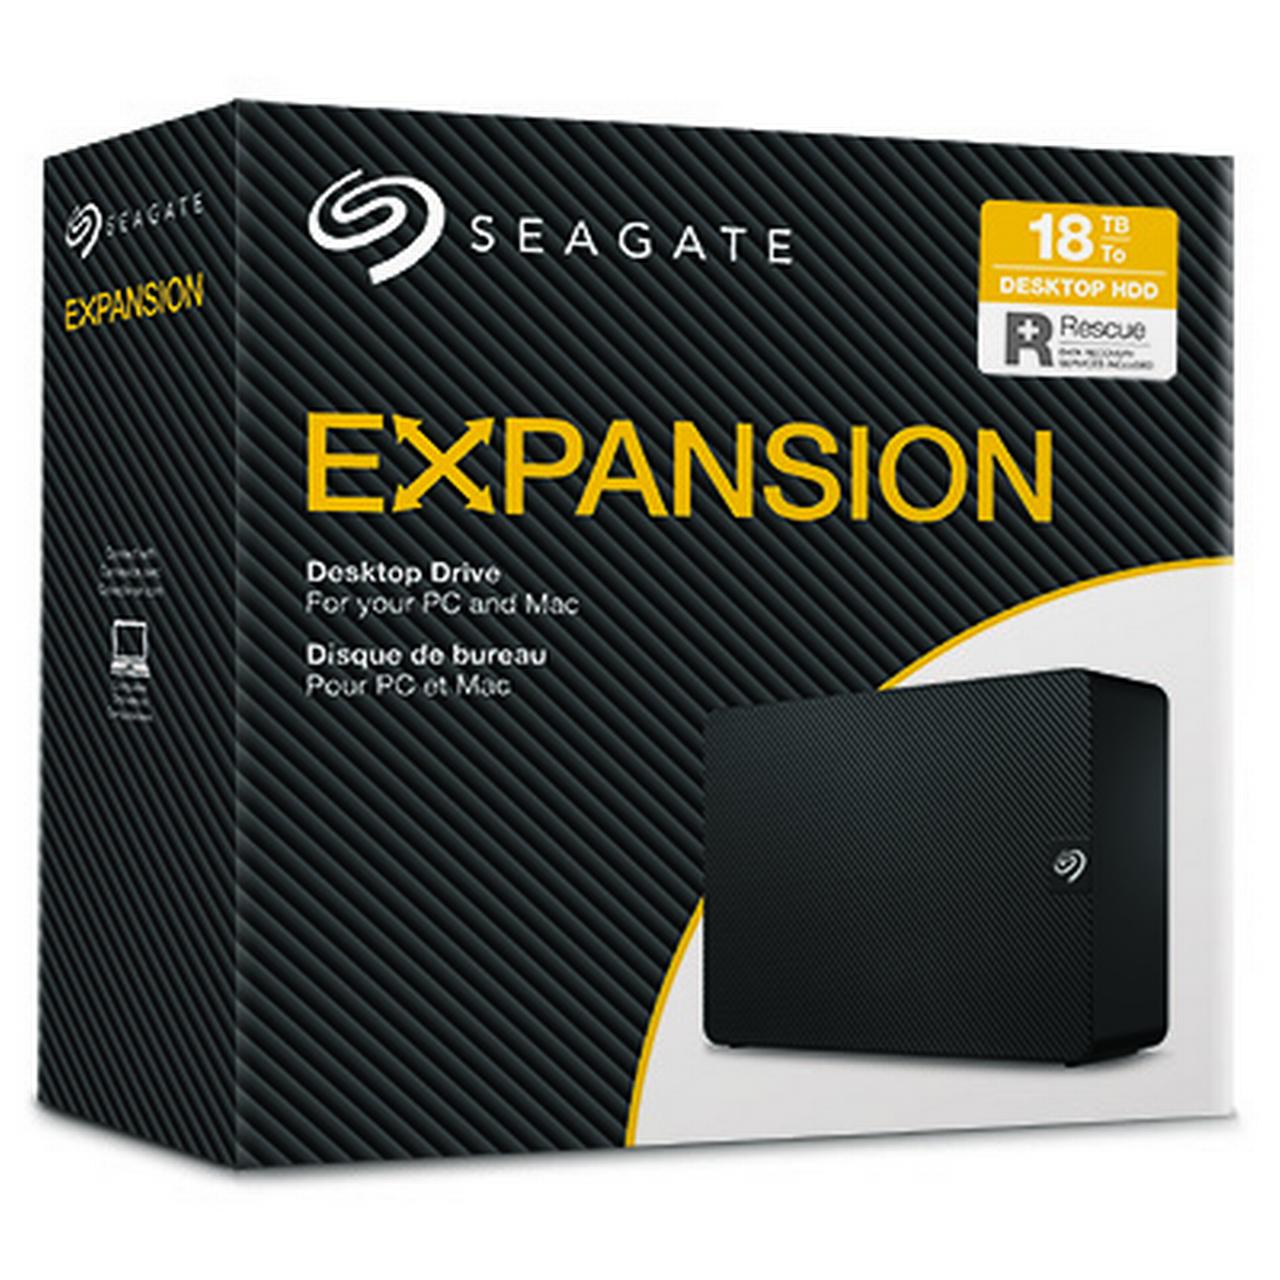 Seagate Expansion 18TB External USB 3.0 Hard Drive with Resue Data Recovery Services - Black (STKP18000400) - image 3 of 7